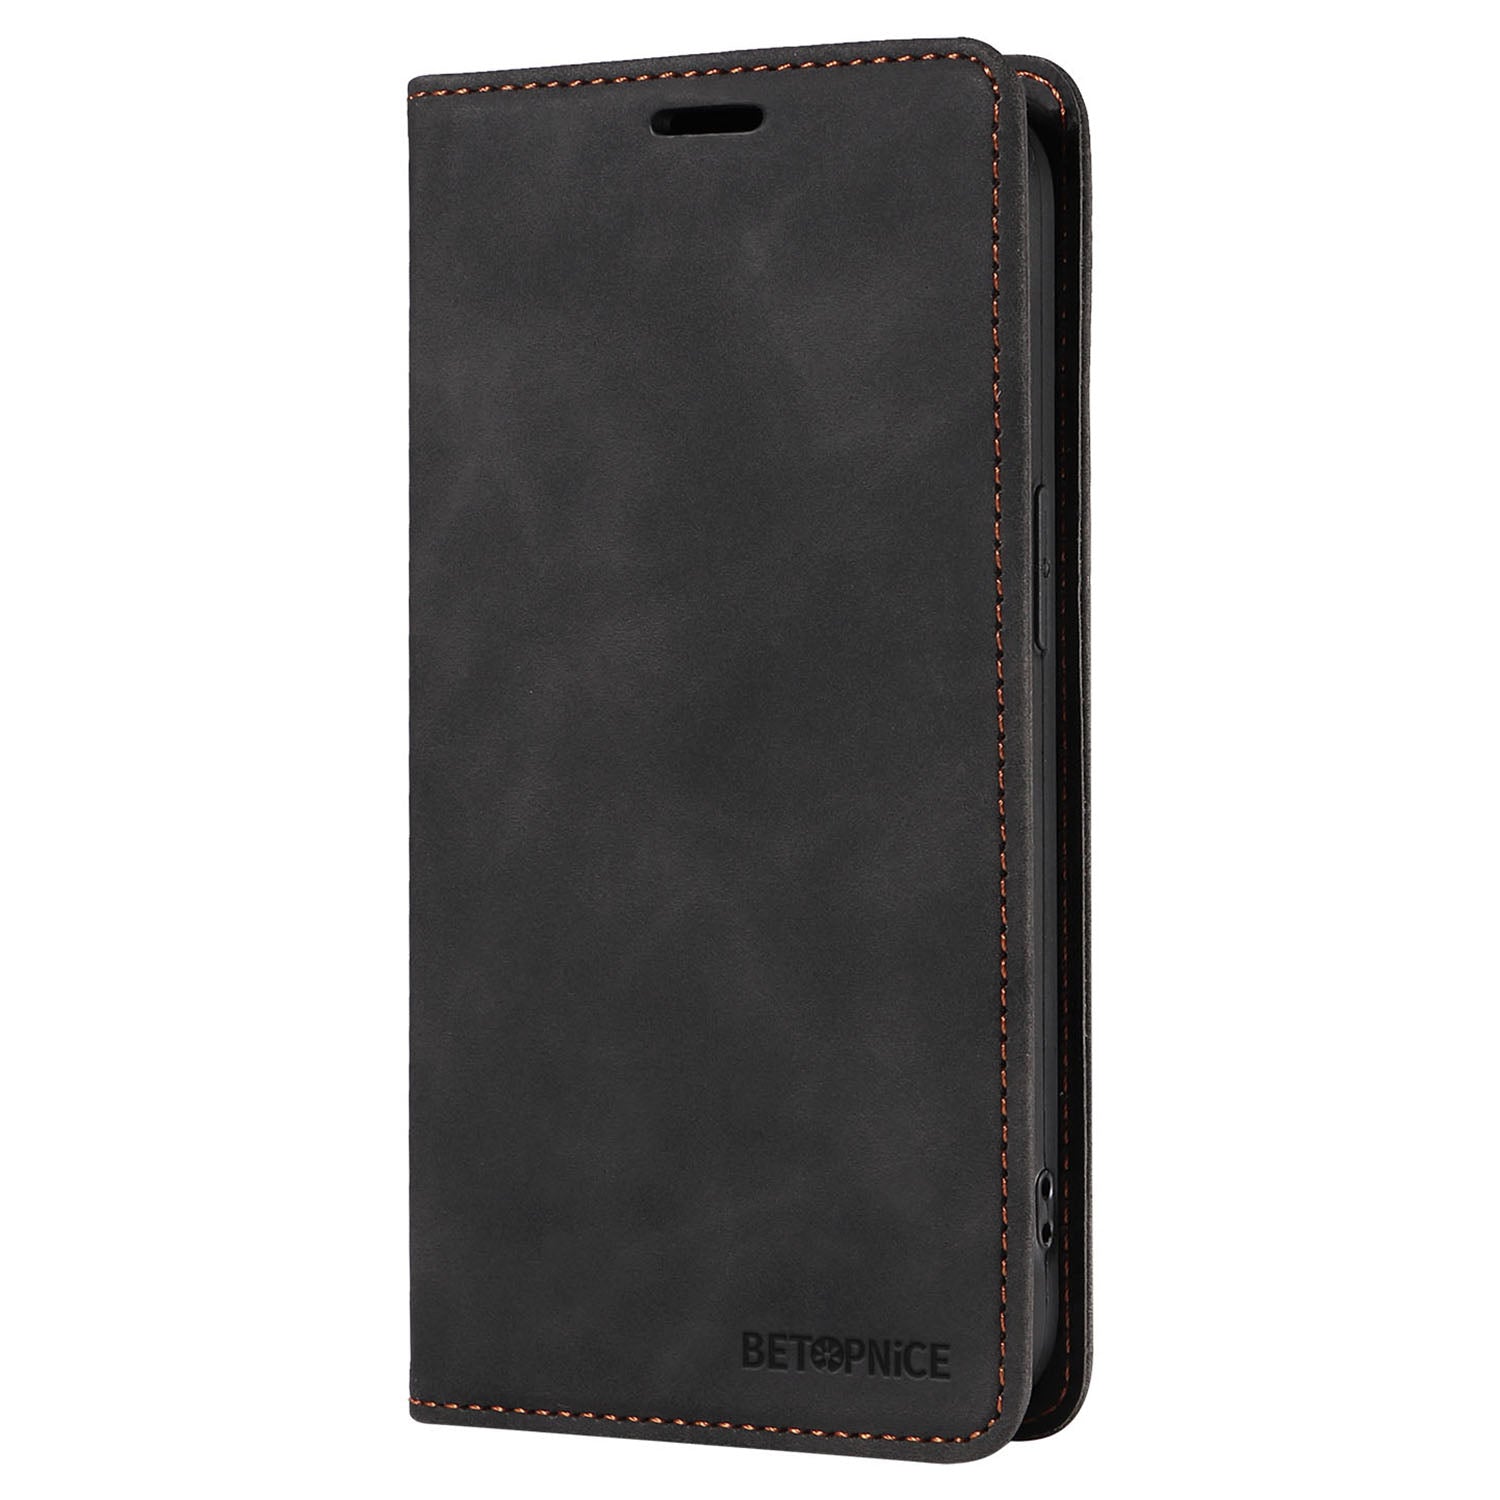 BETOPNICE 003 For vivo Y03 Case RFID Blocking Wallet Leather Flip Phone Cover - Black